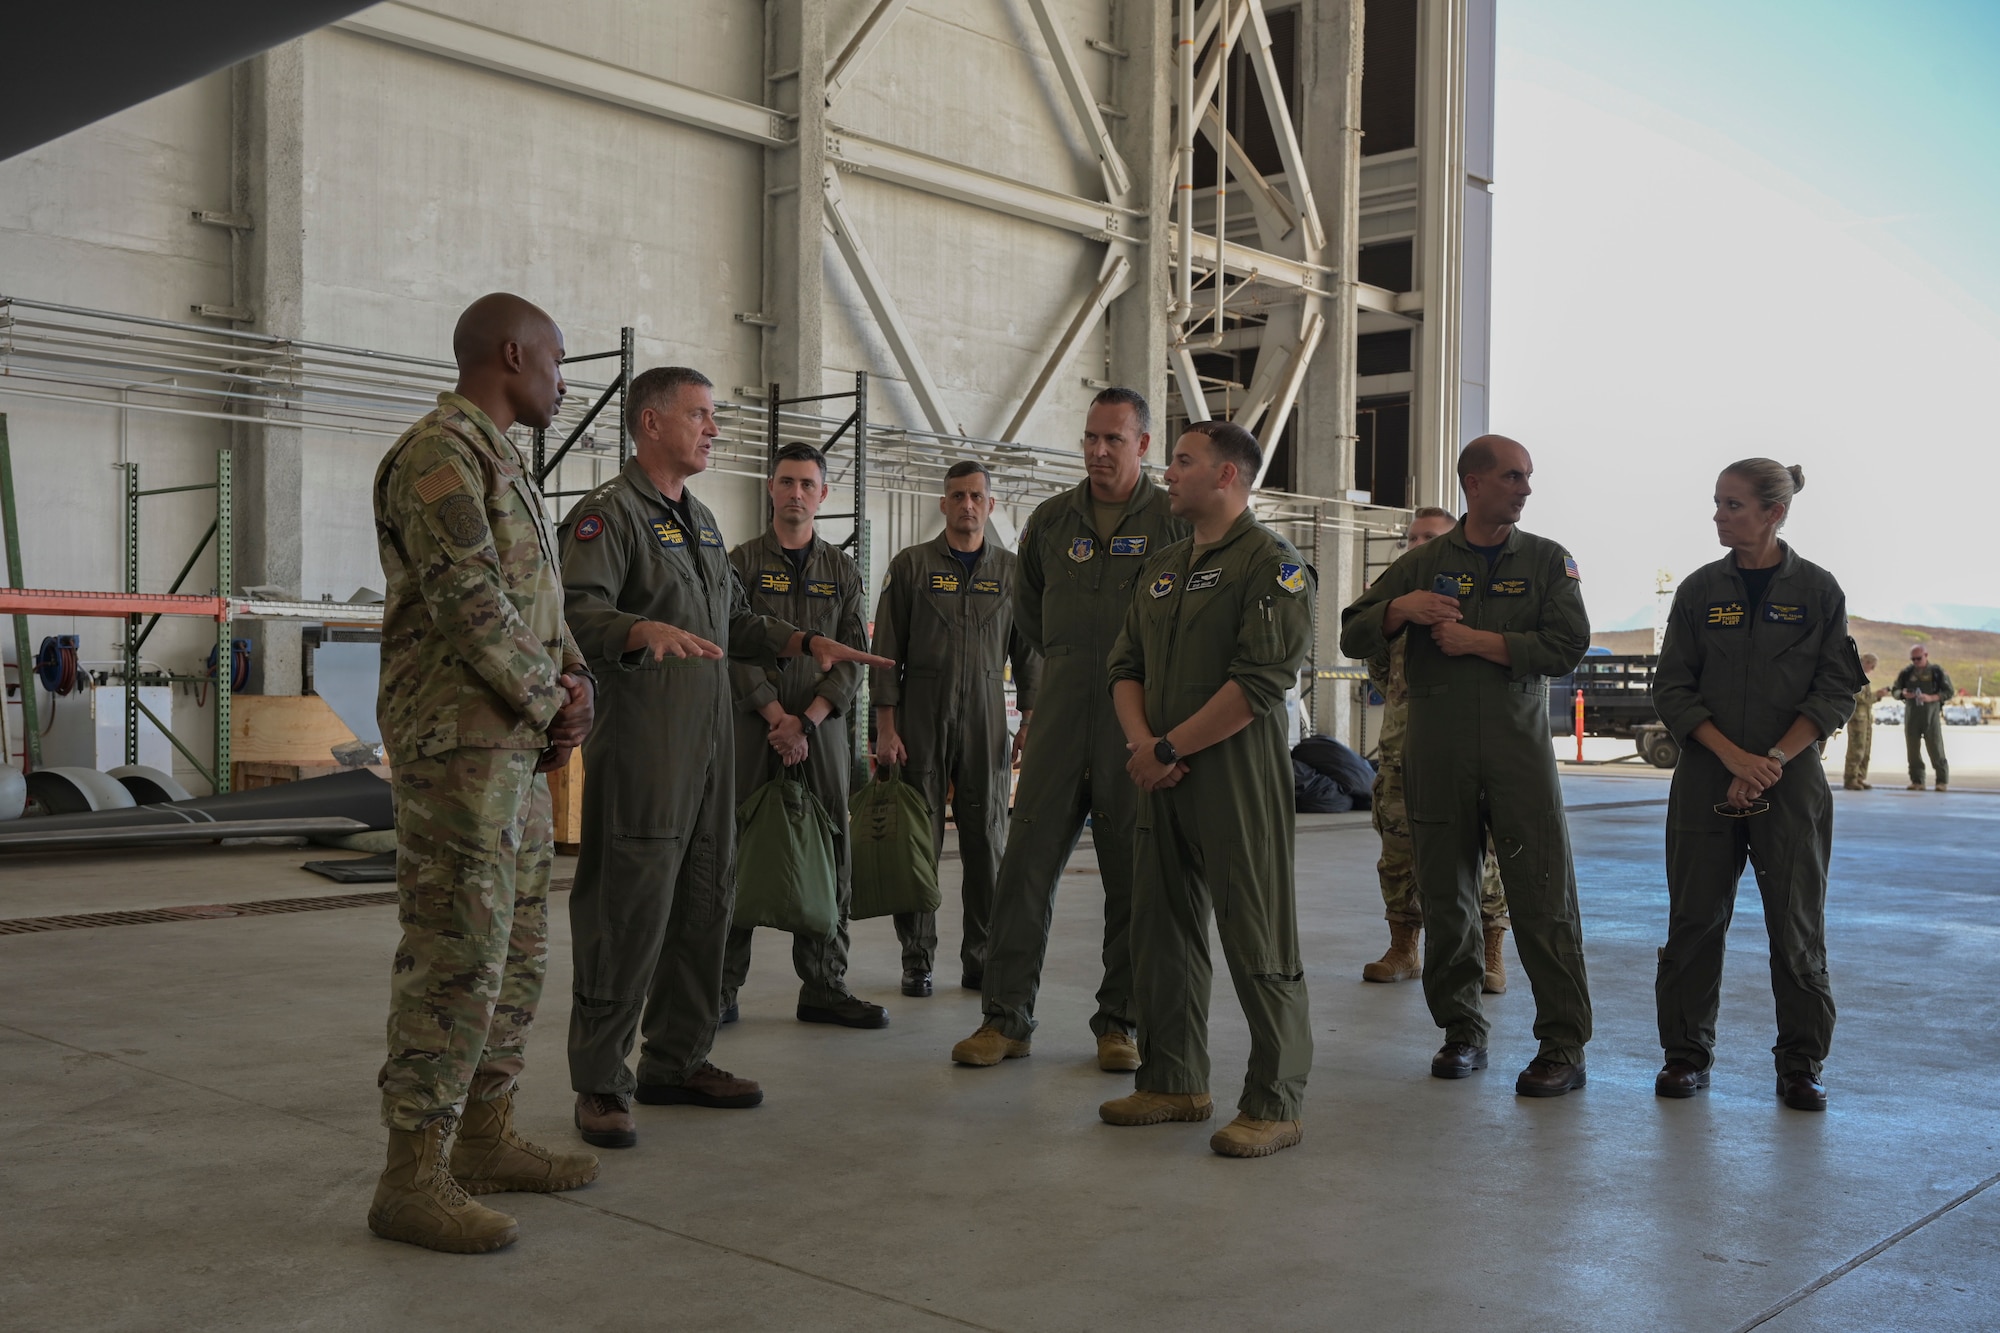 KANEOHE BAY, Hawaii (July 28, 2022) U.S. Air Force Lt. Col. Justin Muller, Rim of the Pacific (RIMPAC) 2022 MQ-9 detachment mission commander, and U.S. Air Force Master Sgt. Terrelle Thomas, 29th Aircraft Maintenance Squadron production superintendent, explain general MQ-9 Reaper specifications and maintenance procedures to U.S. Navy Vice Adm. Michael E. Boyle, Commander, 3rd Fleet, during RIMPAC, July 29, at Marine Corps Air Station Kaneohe Bay, Hawaii.